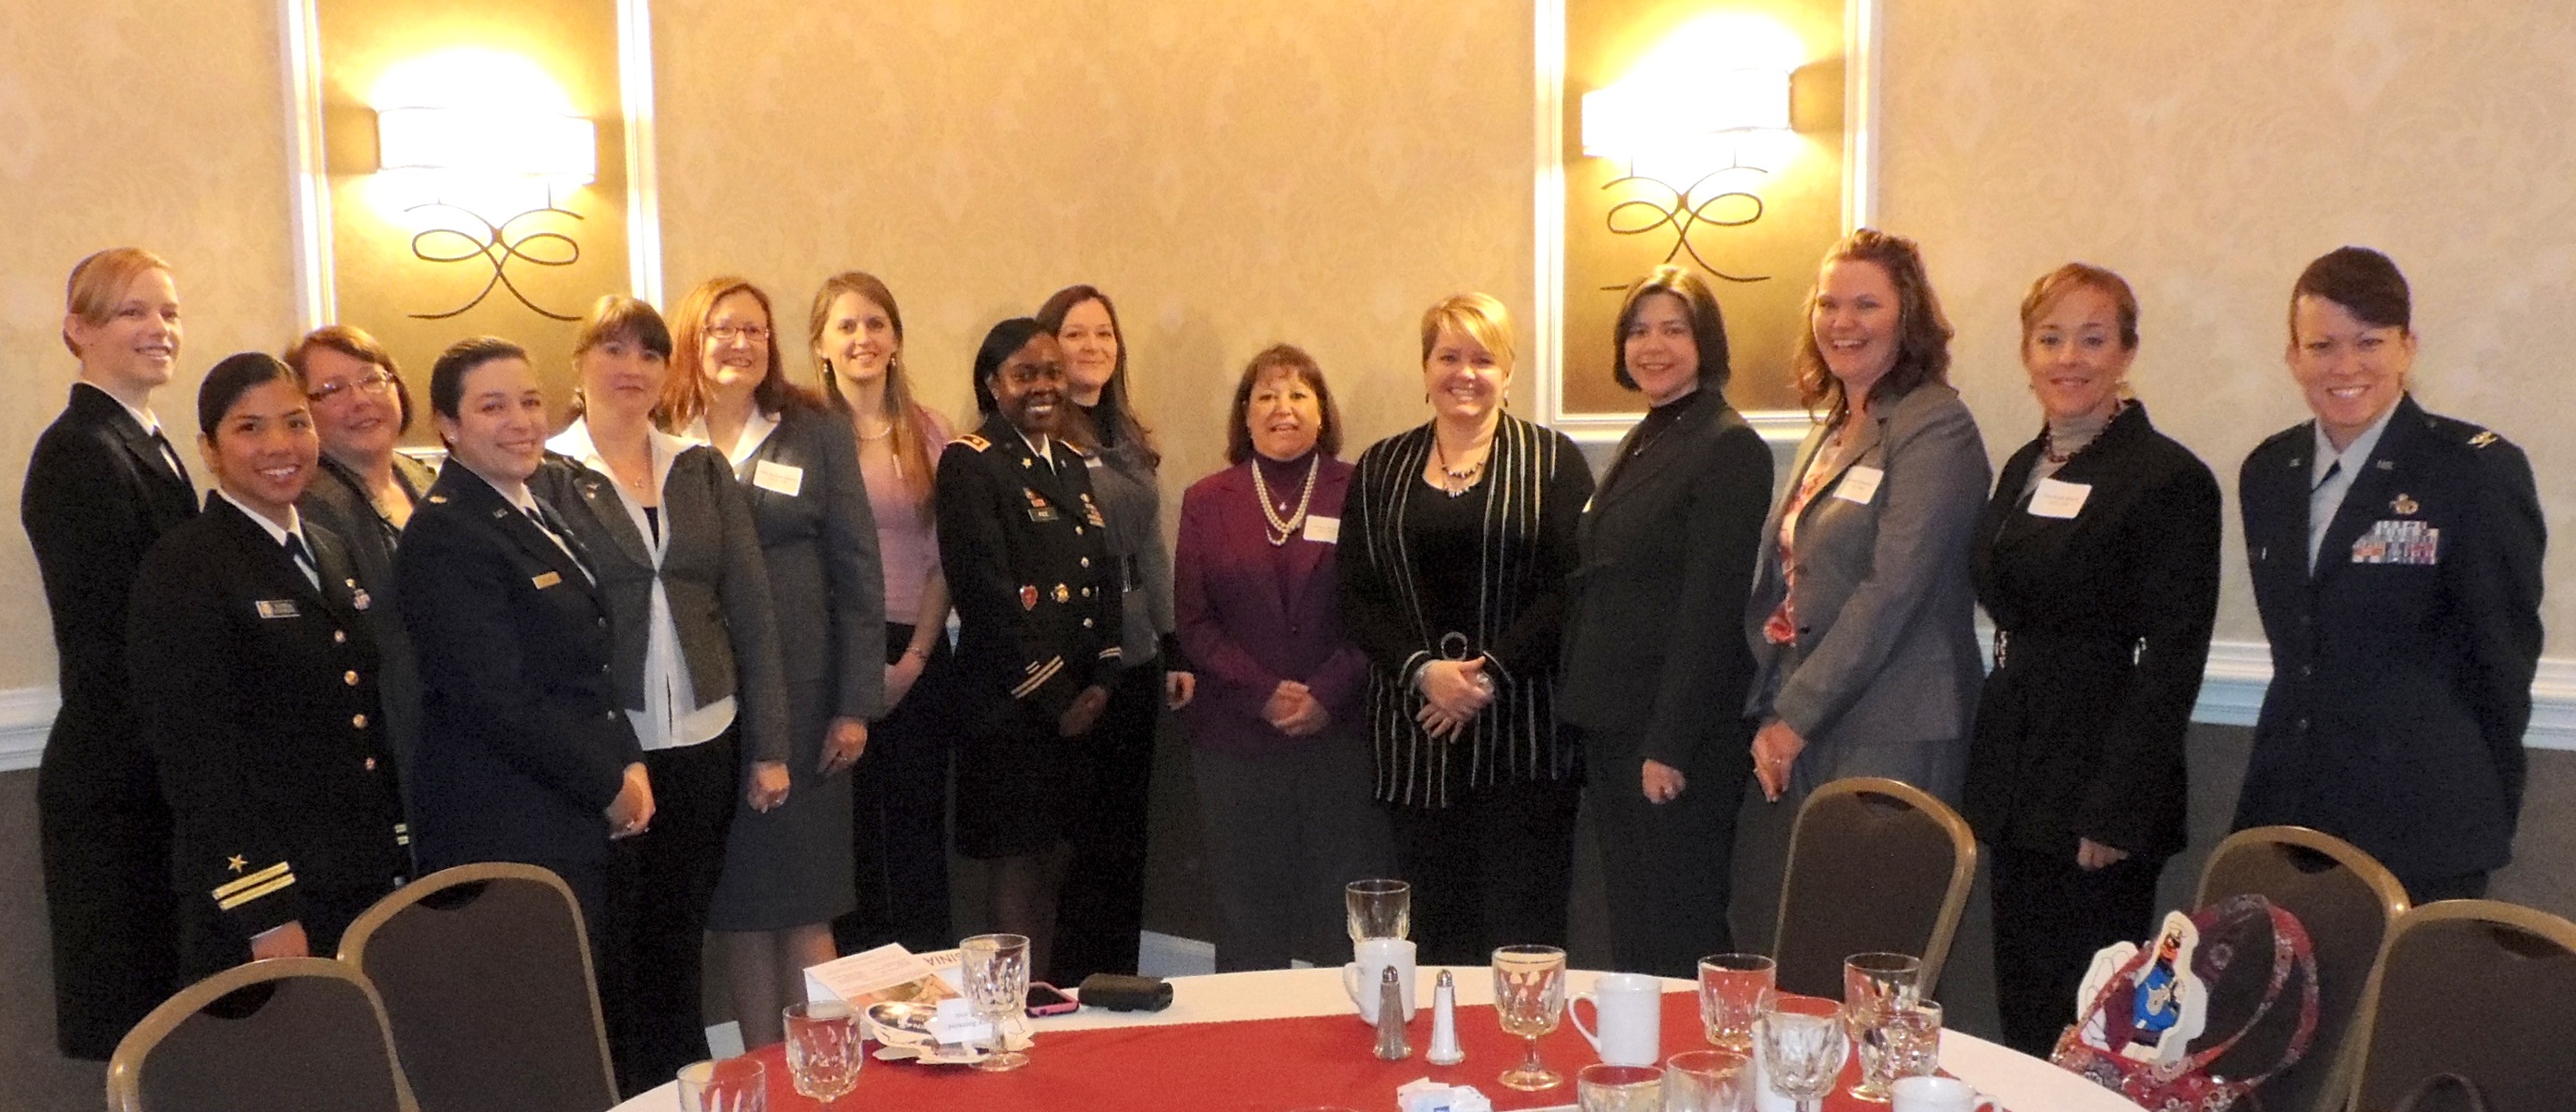 Virginia Tech Corps of Cadets alumnae at the 2013 Women of the VTCC event gathered at the Holiday Inn